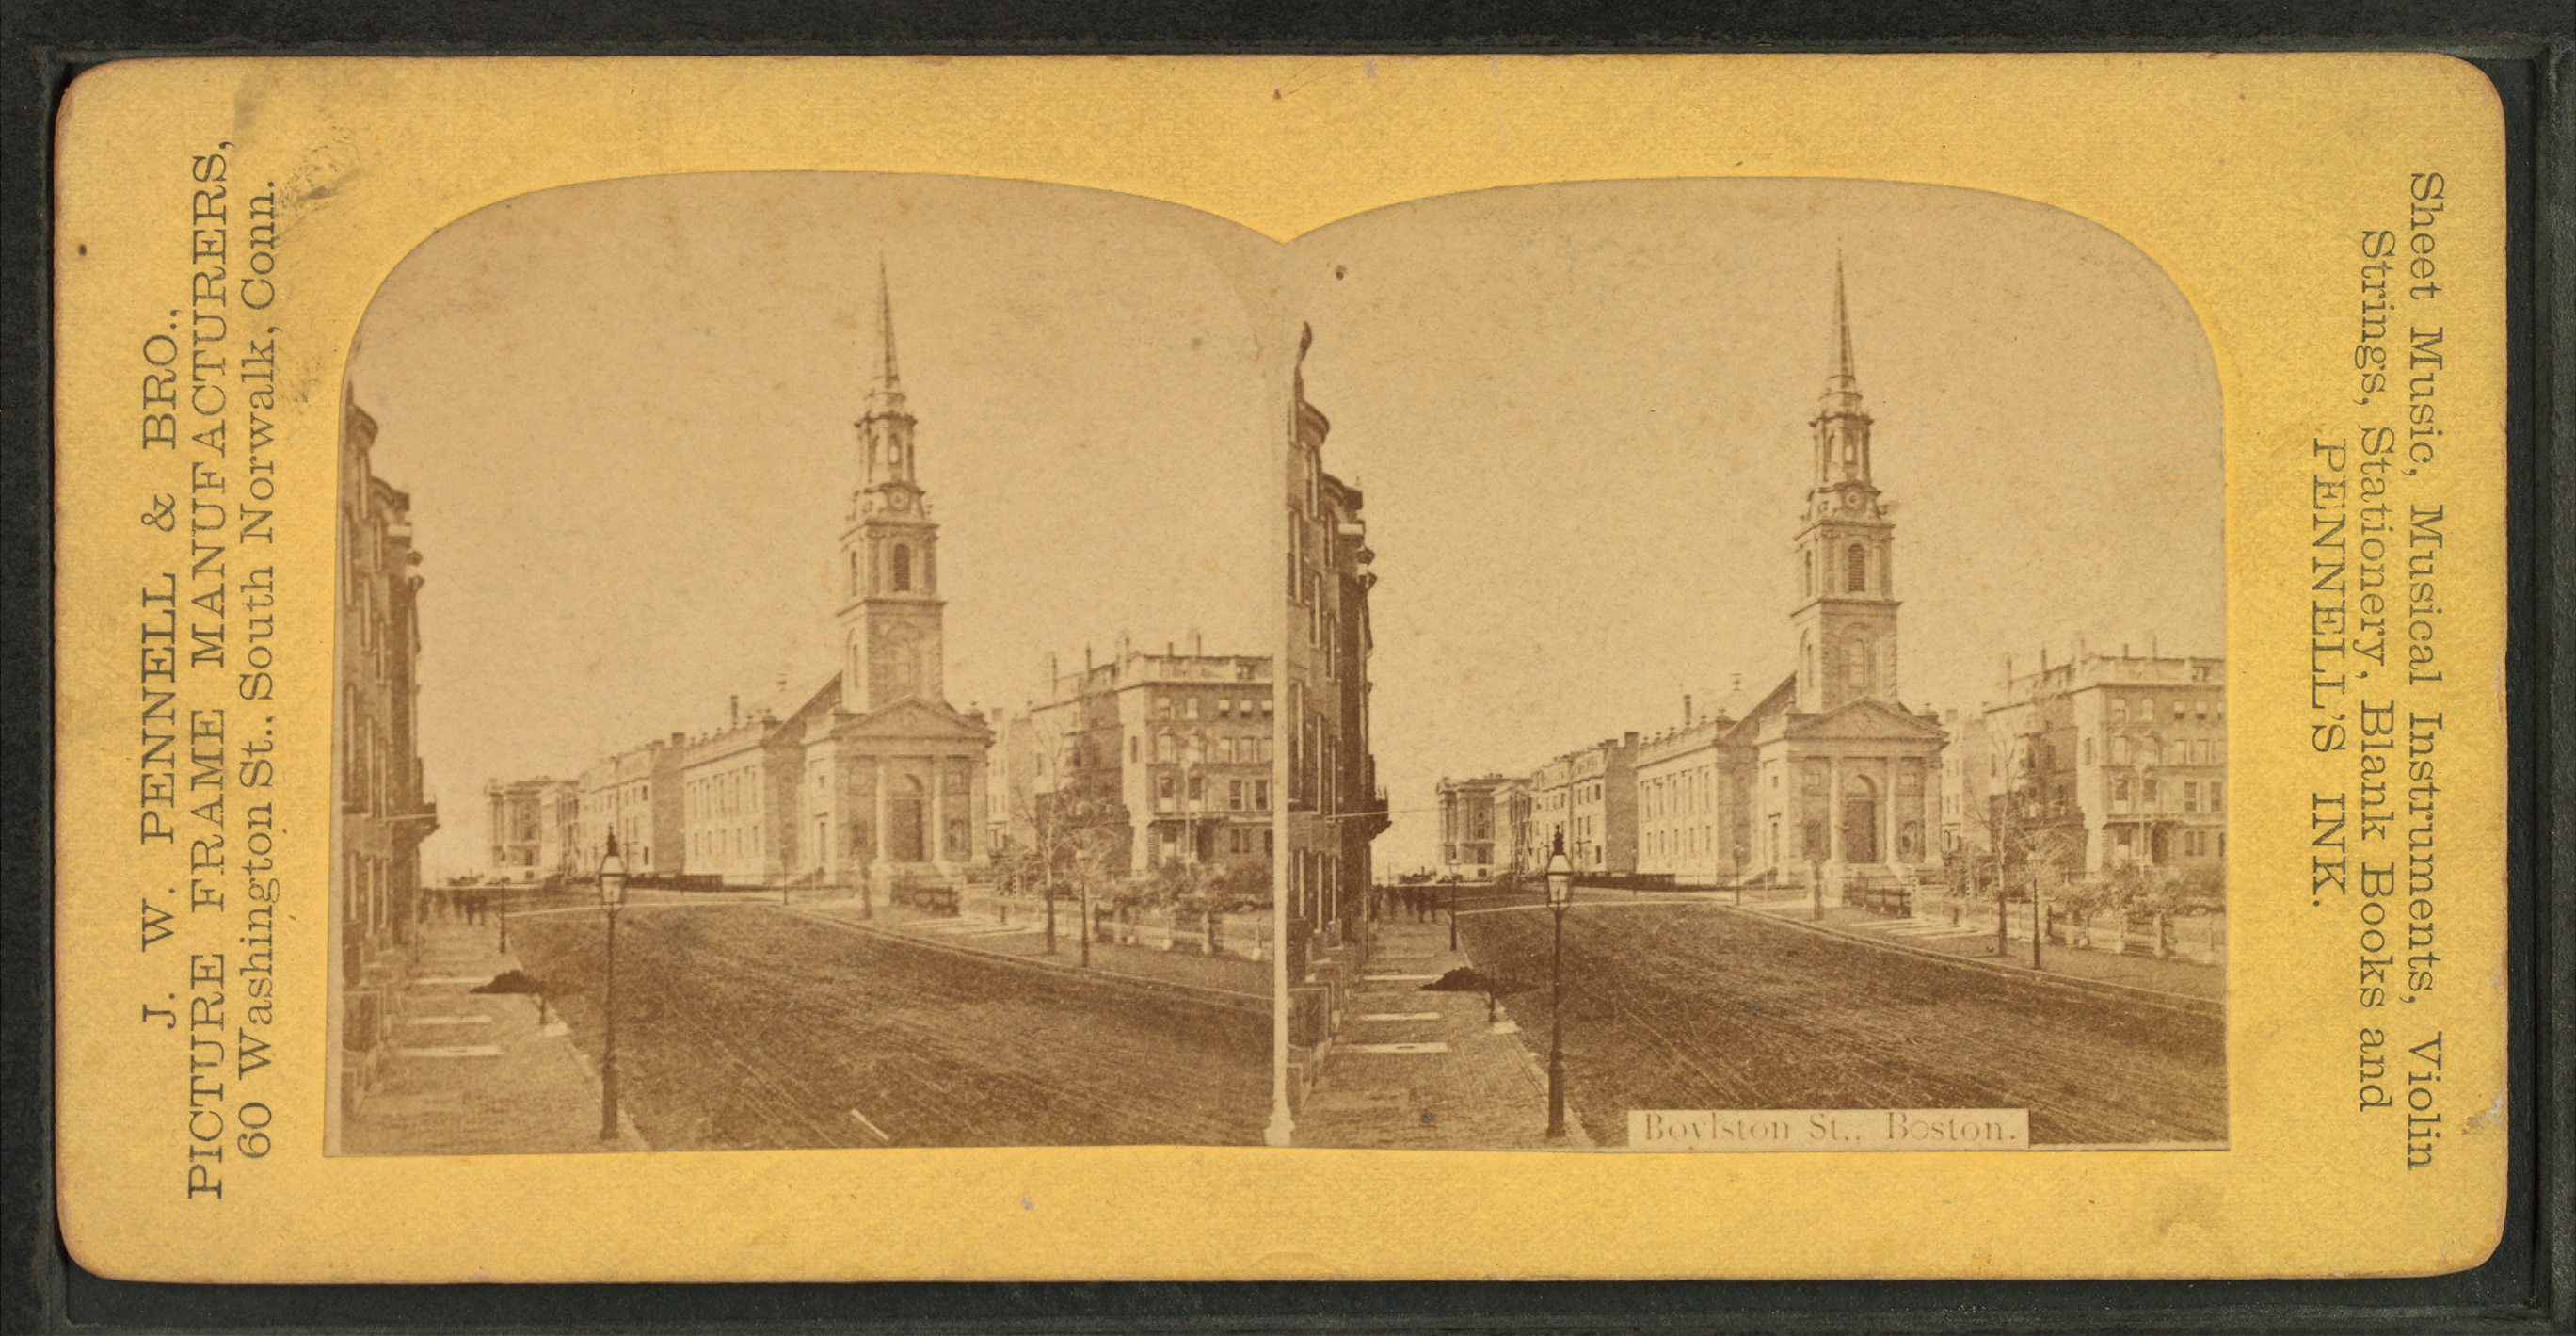 Boylston St., Boston, from Robert N. Dennis collection of stereoscopic views